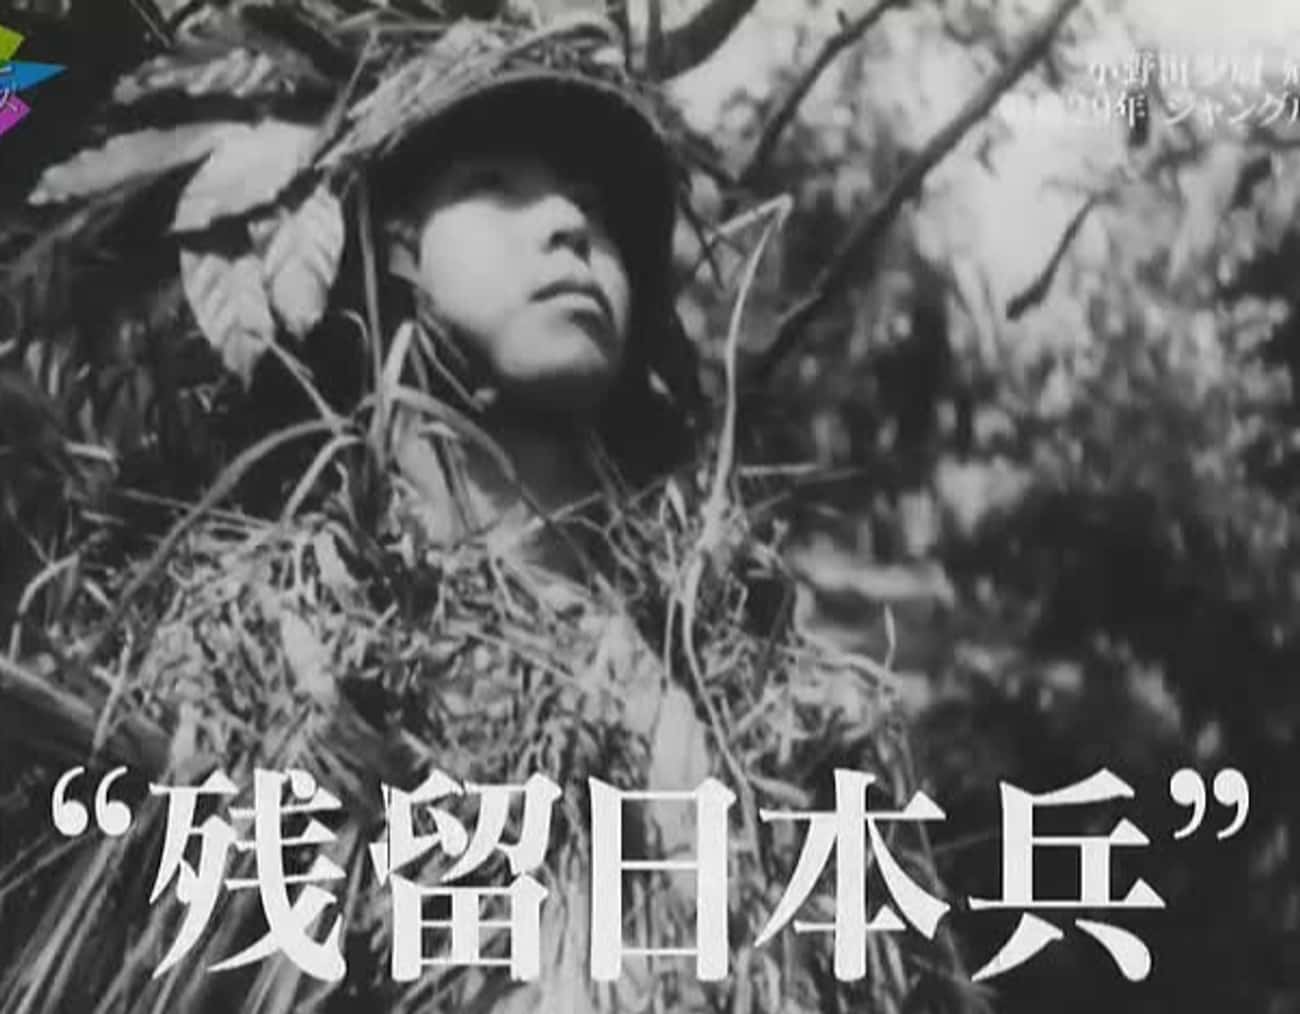 The Last Japanese WWII Soldier To Surrender Did So In 1974